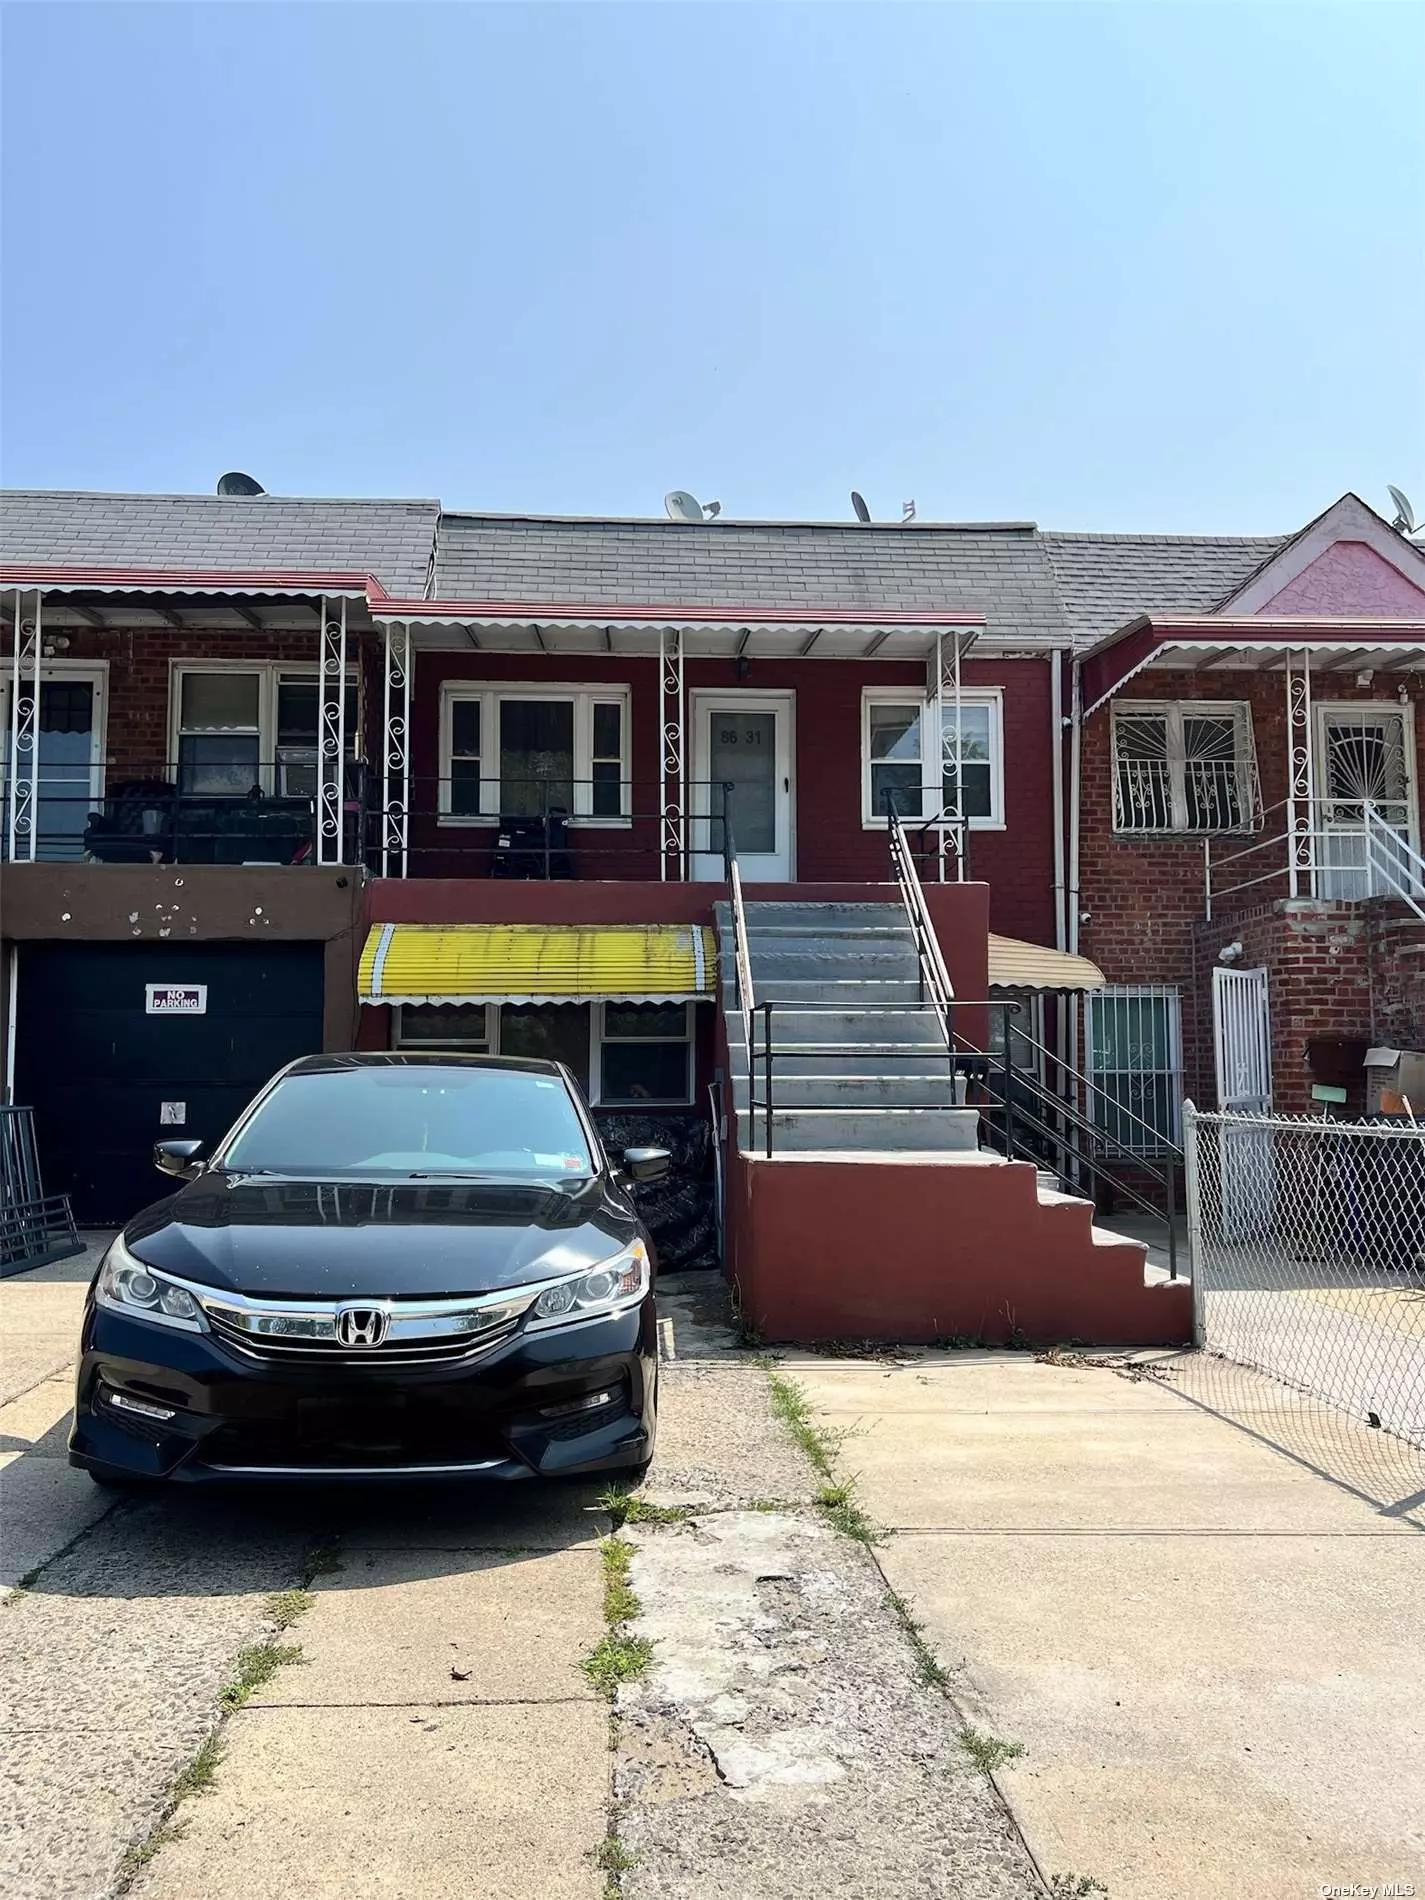 Great investment opportunity. All Brick 2 family property in Woodhaven. 2bed 1 bath on each floor. The first floor is renovated with a private backyard. Private driveway for 2 cars. Closed to the Forest Park, Public Transportation (J & Z train), Schools, and lots of local Shops.